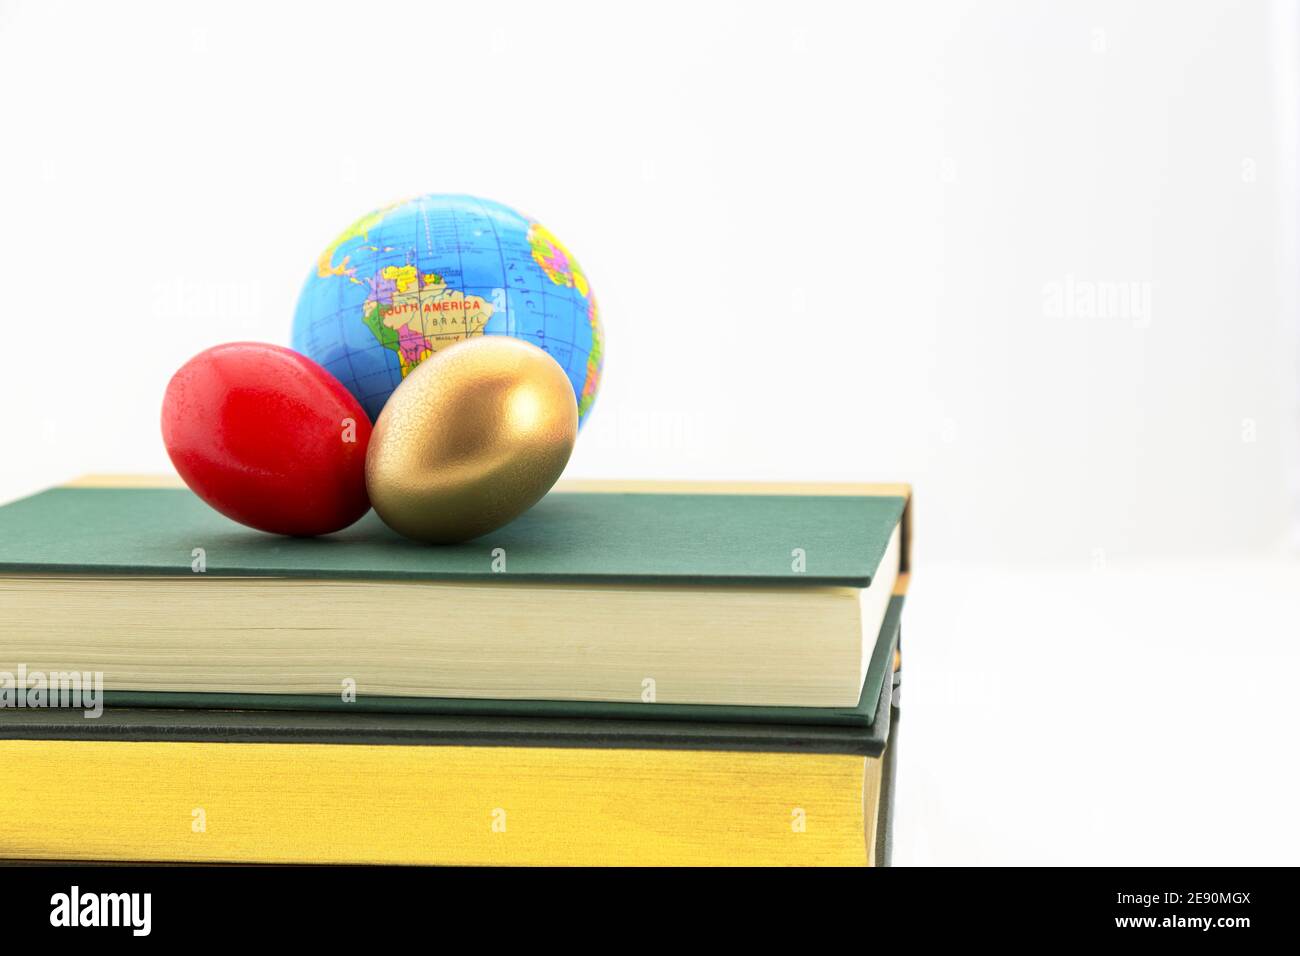 Gold egg, red egg, and globe on books are concepts of global industry business risks and profits, challenge and success strategies. Stock Photo